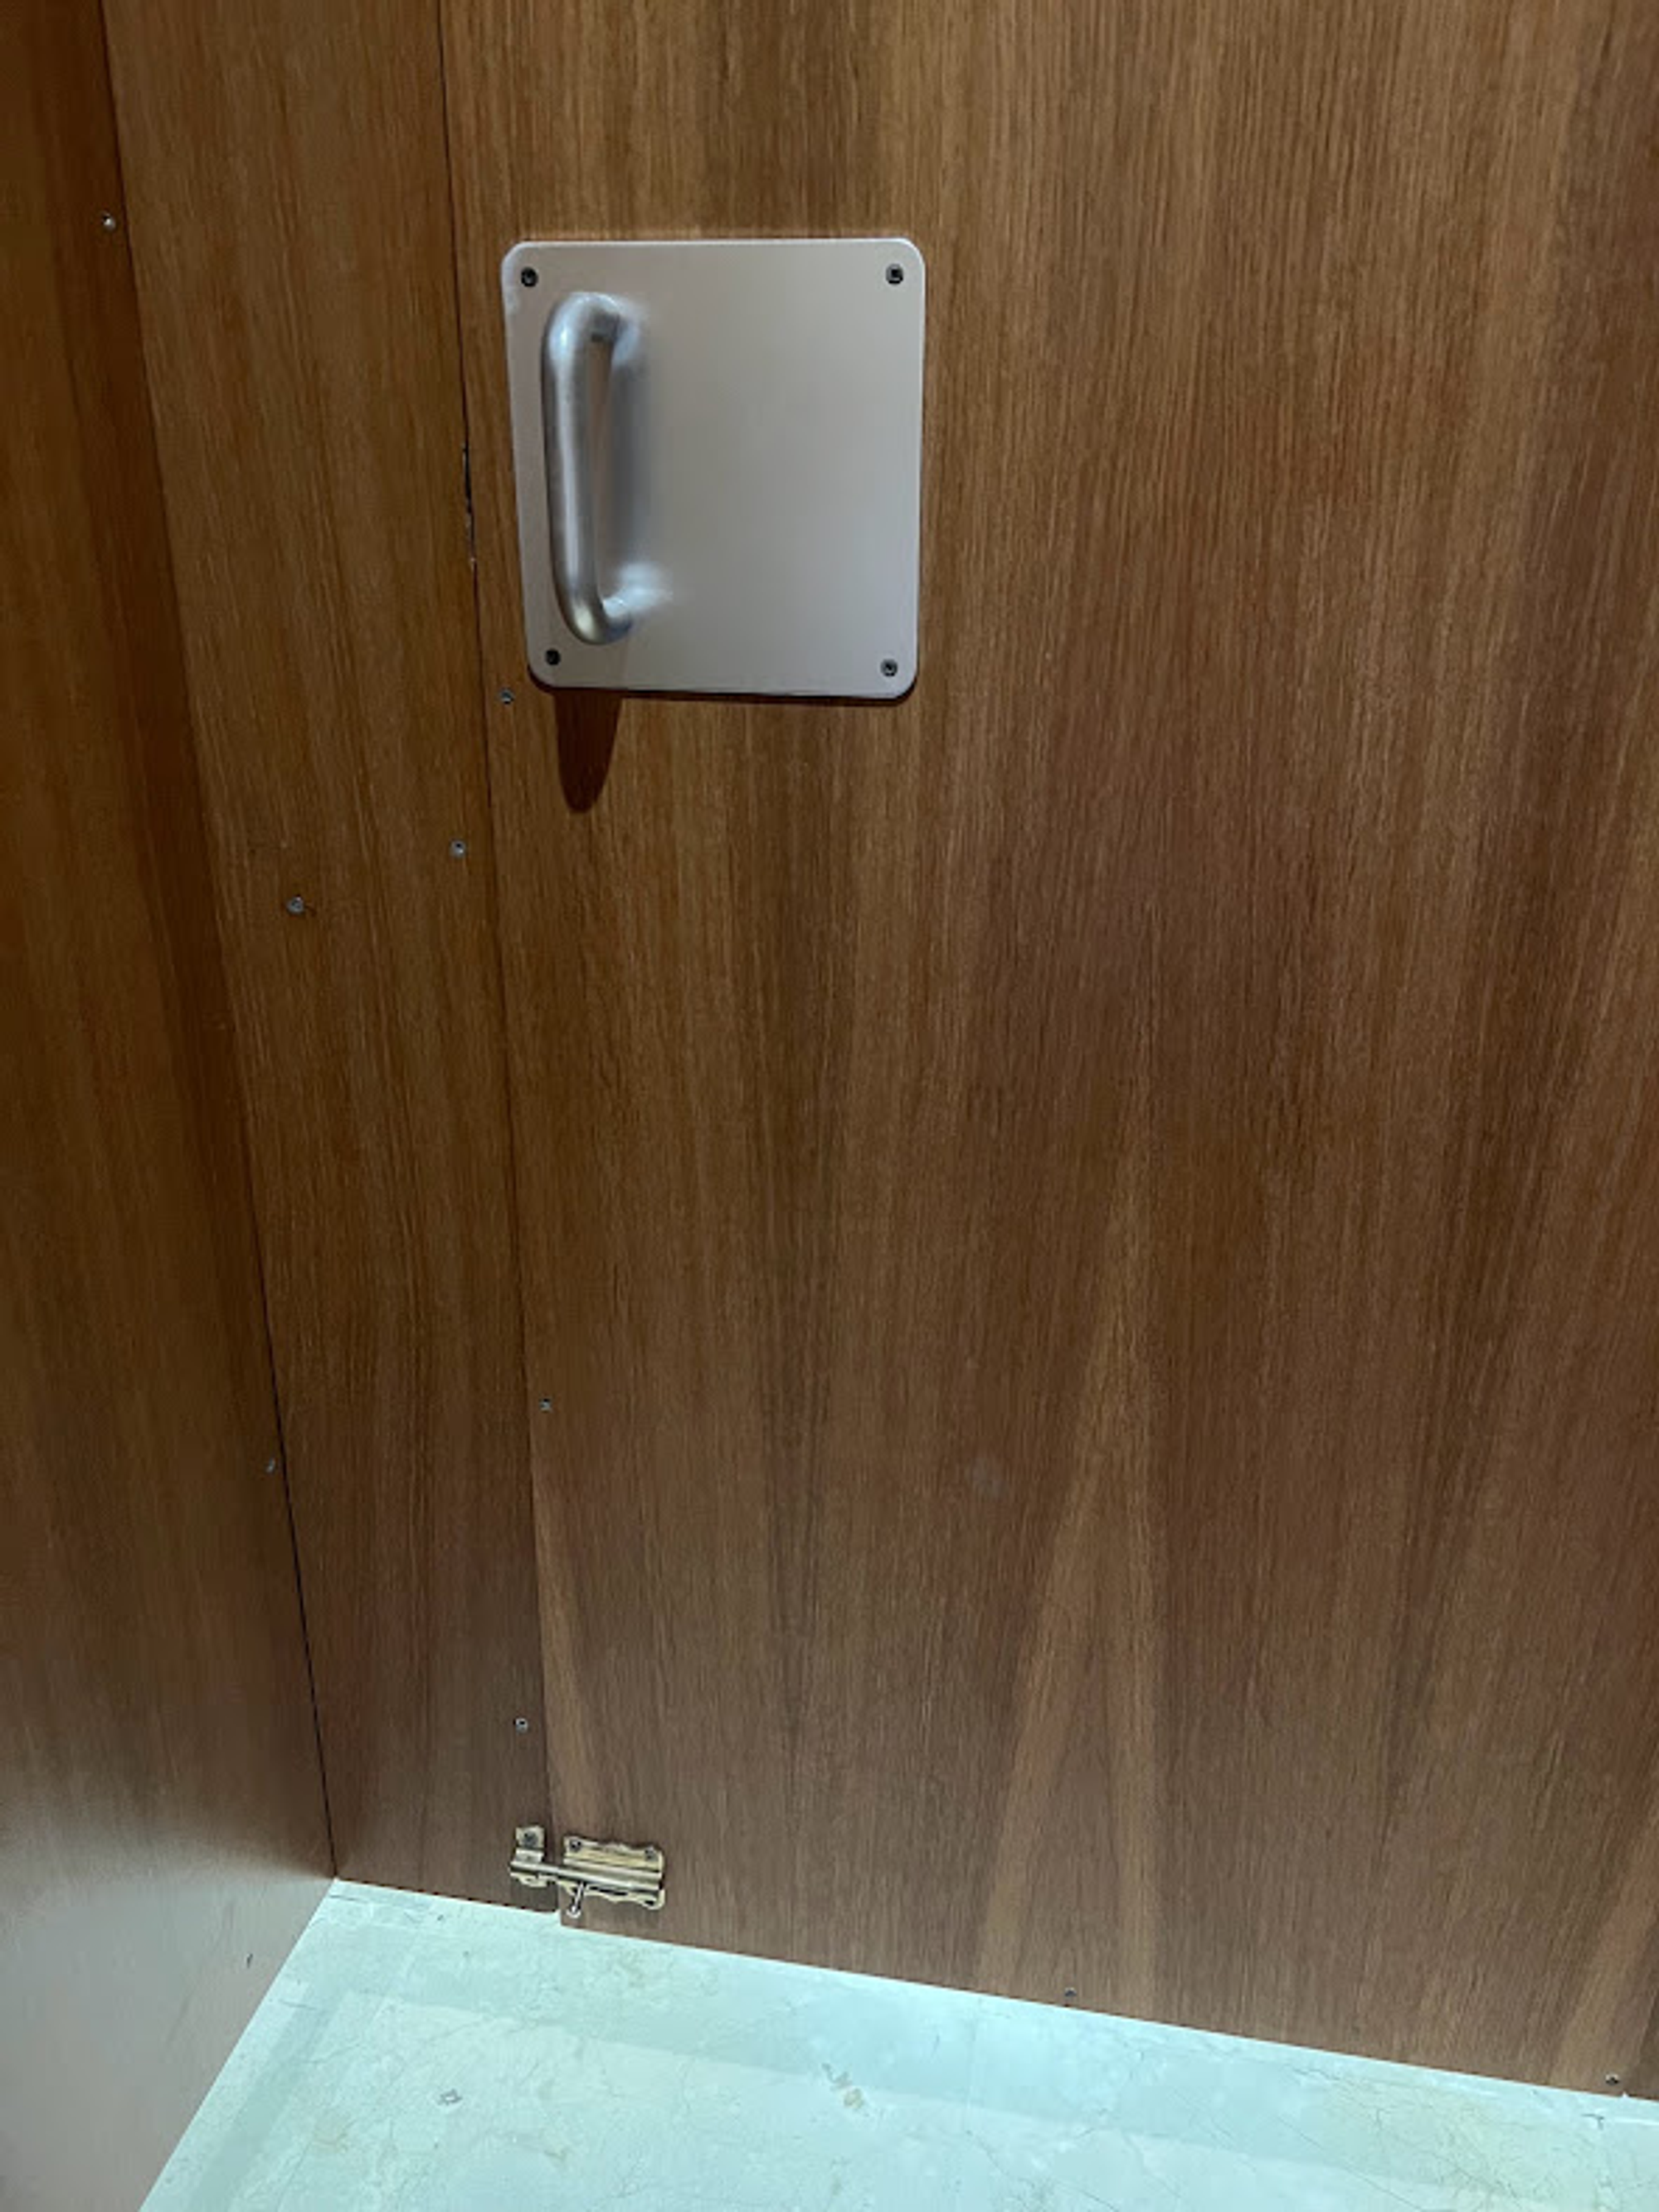 The bathroom’s lock was at the bottom of the door, very unique.